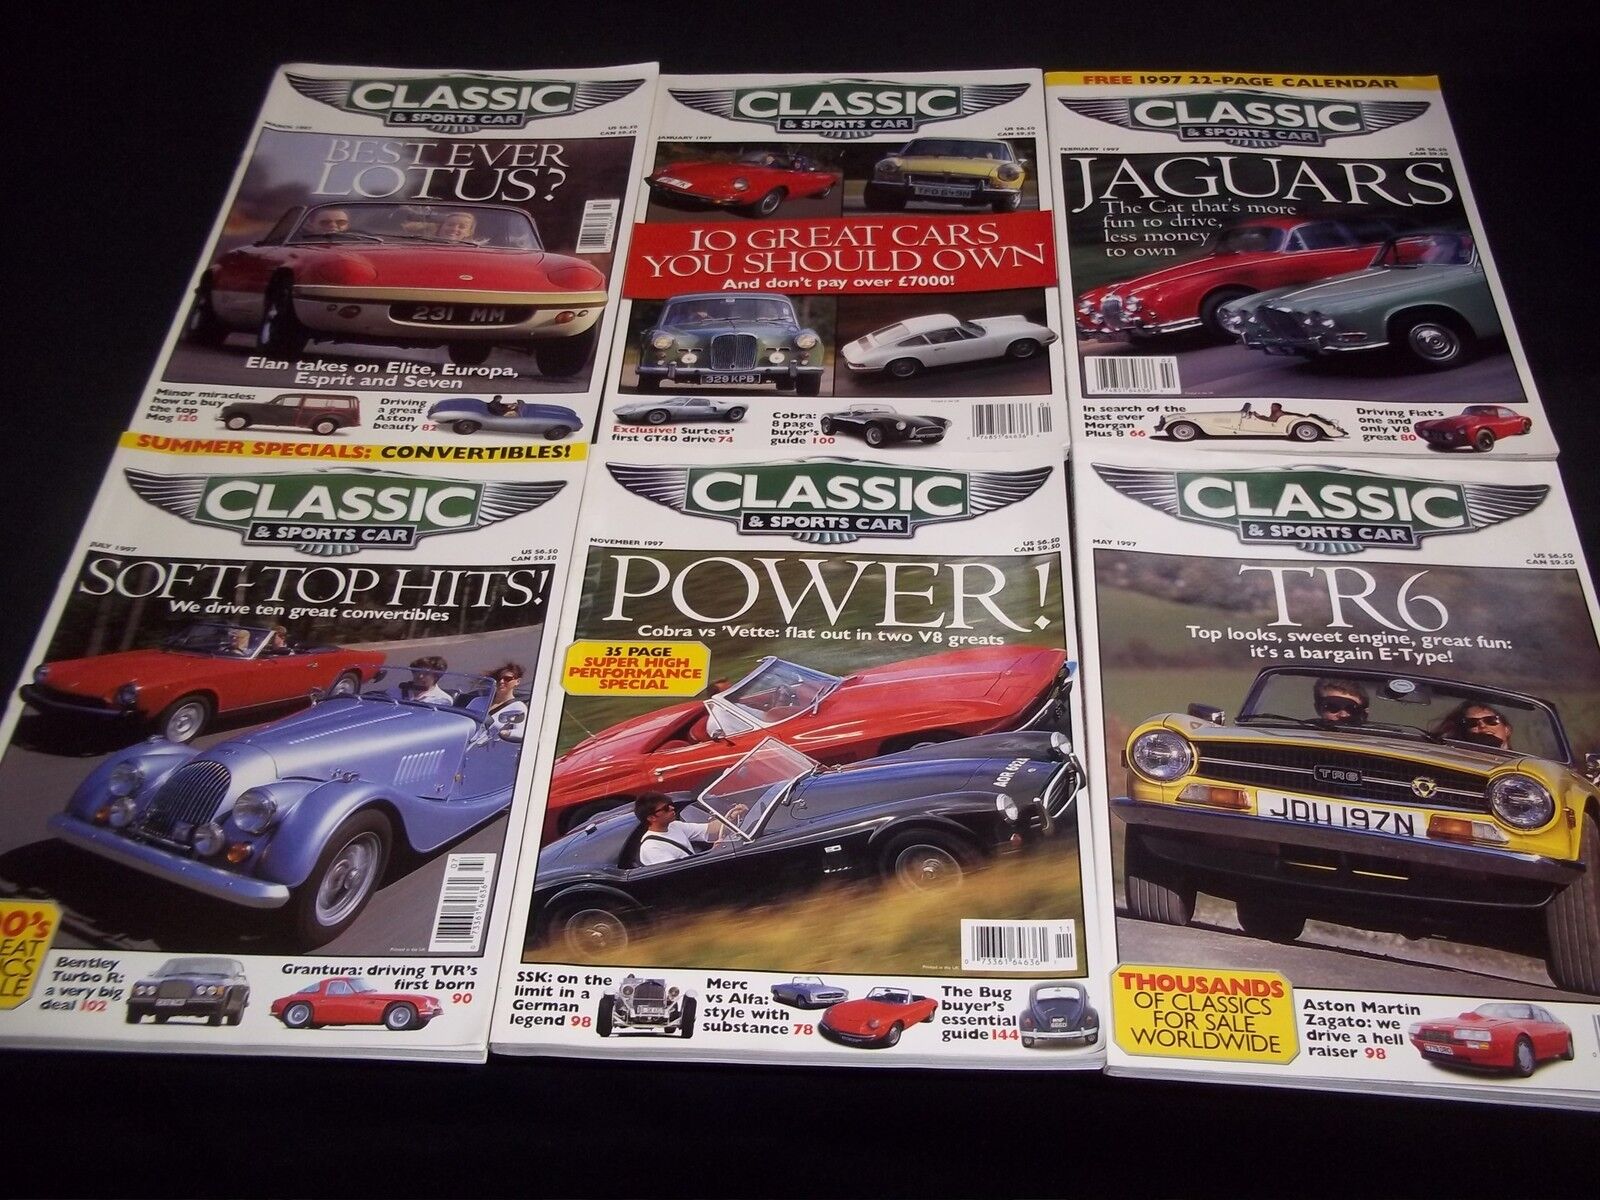 1997 CLASSIC & SPORTS CAR MAGAZINE LOT OF 10 ISSUES - NICE COVERS - M 625